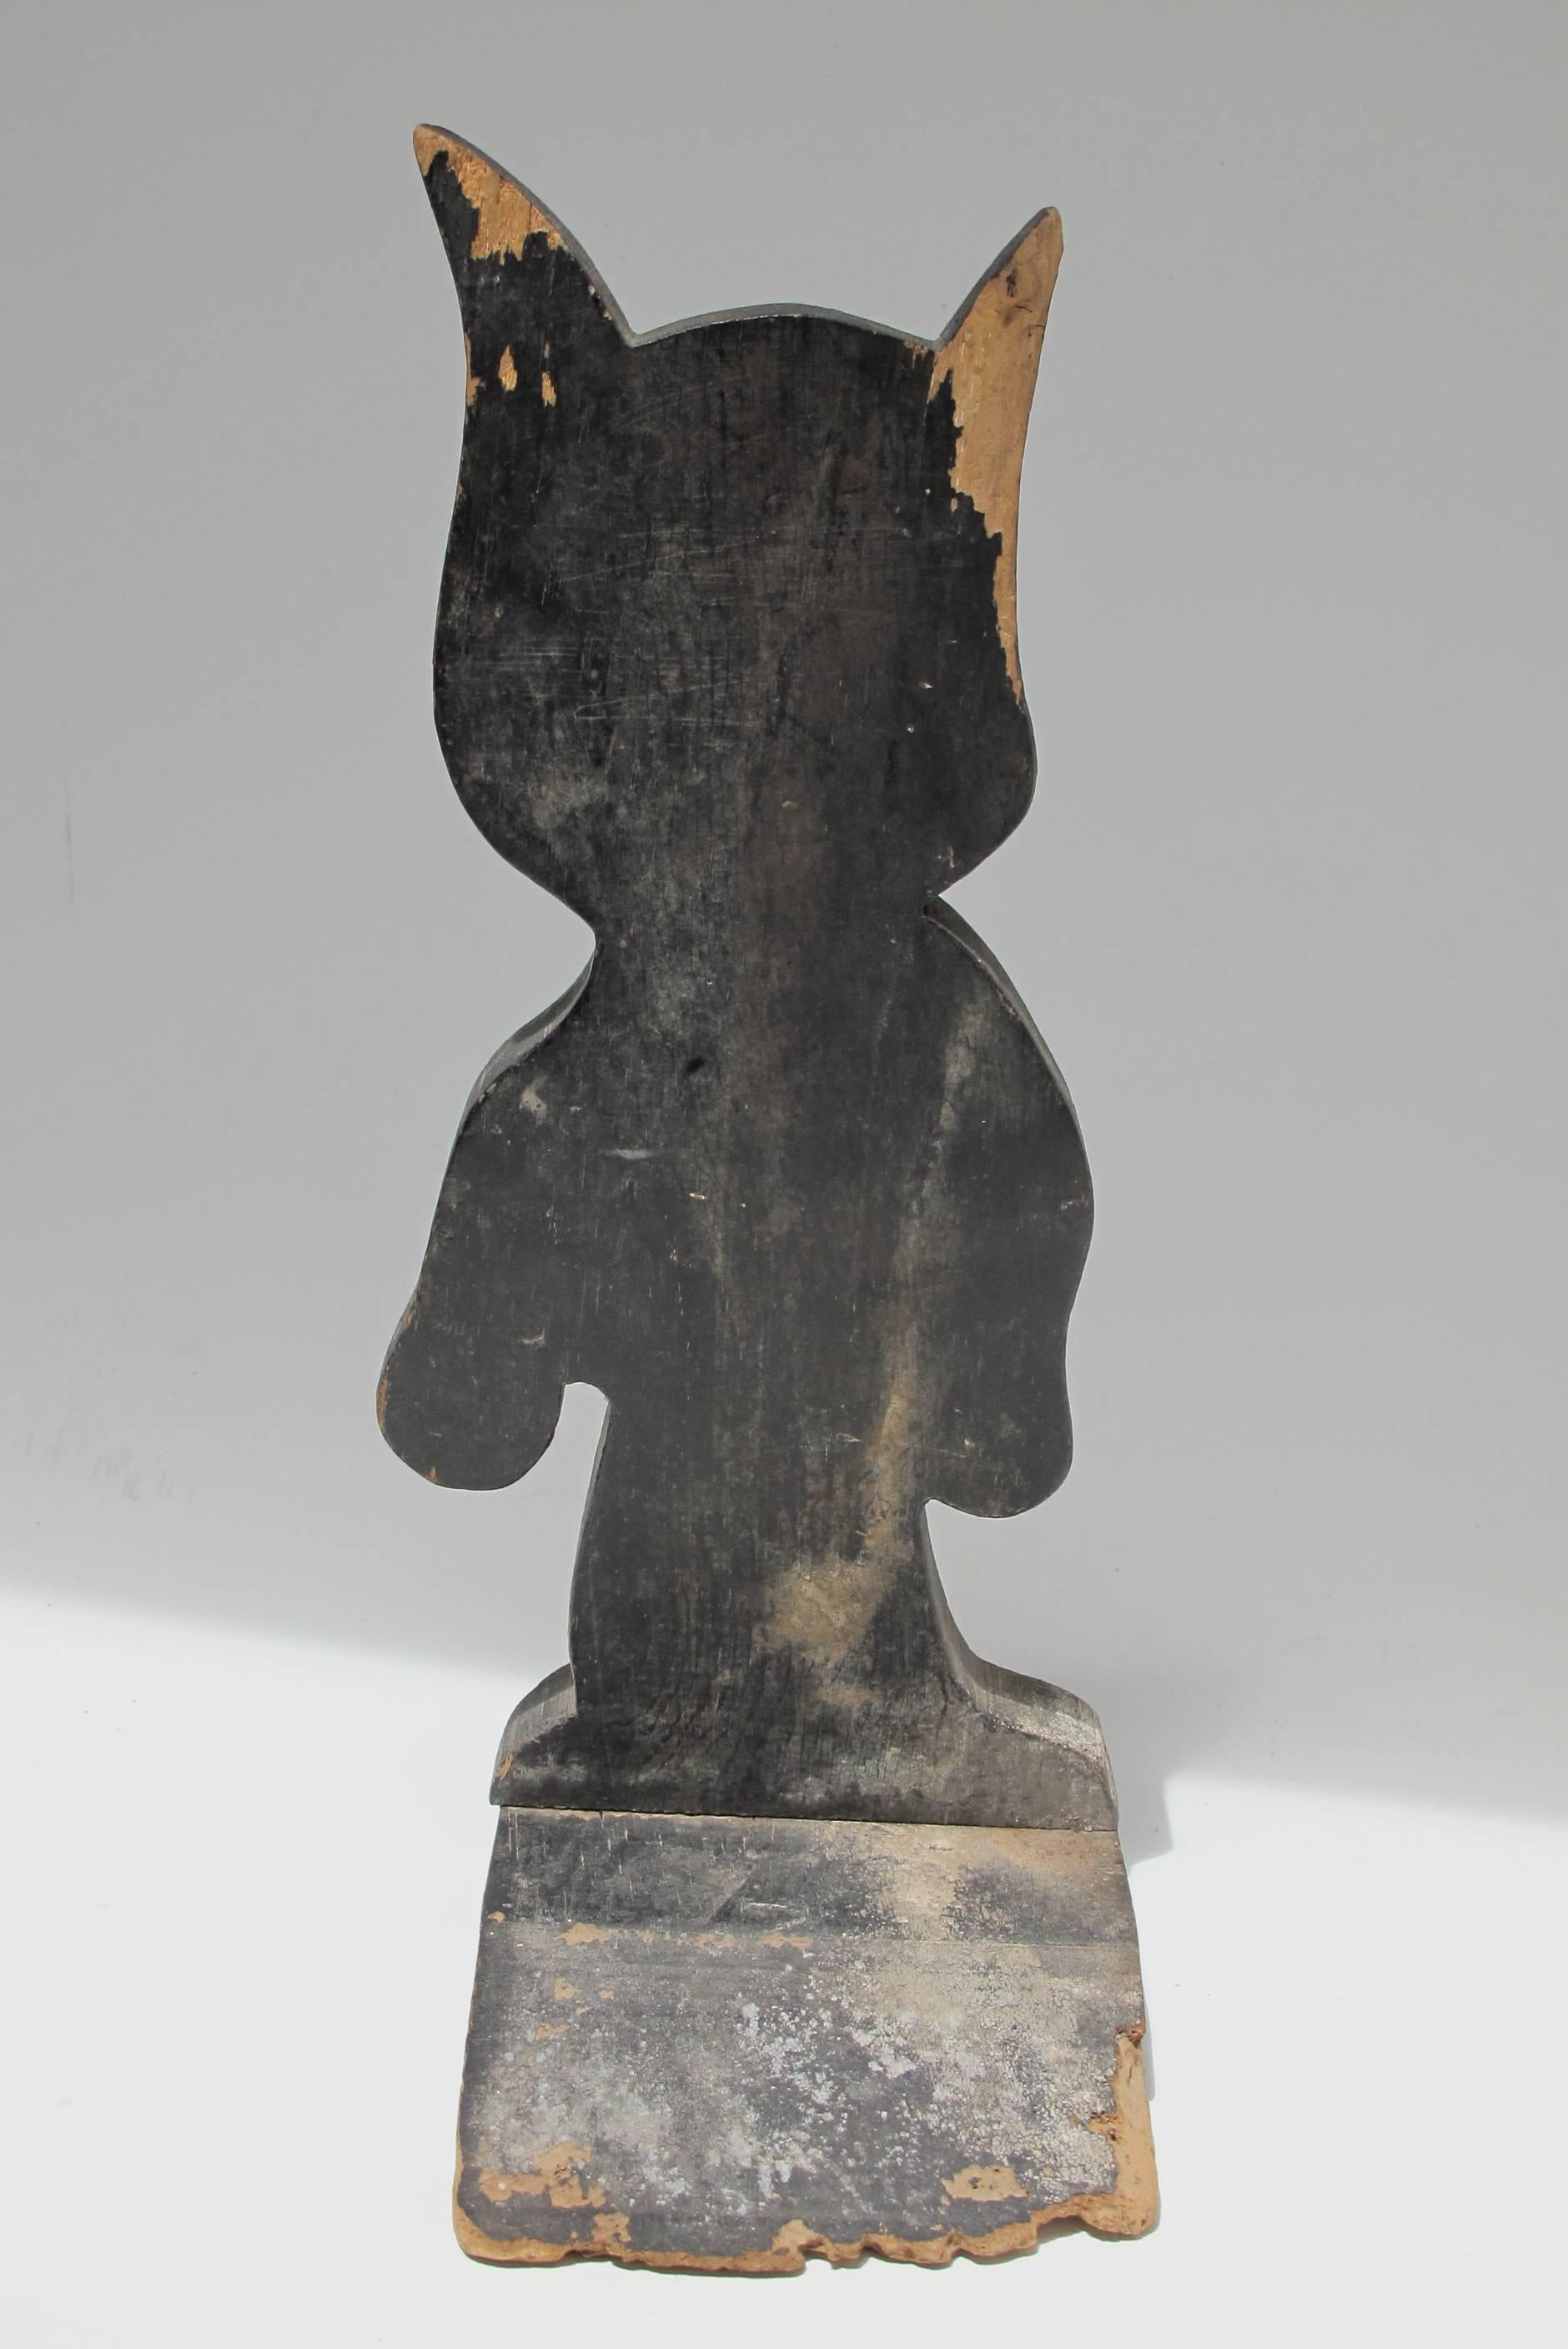 Cut and painted wood image of the great cartoon character Felix the Cat, a wood wedge is fixed the back of Felix to slide under a door to keep it open.
Felix the Cat became enormously popular in the 1920s and was the first animation superstar